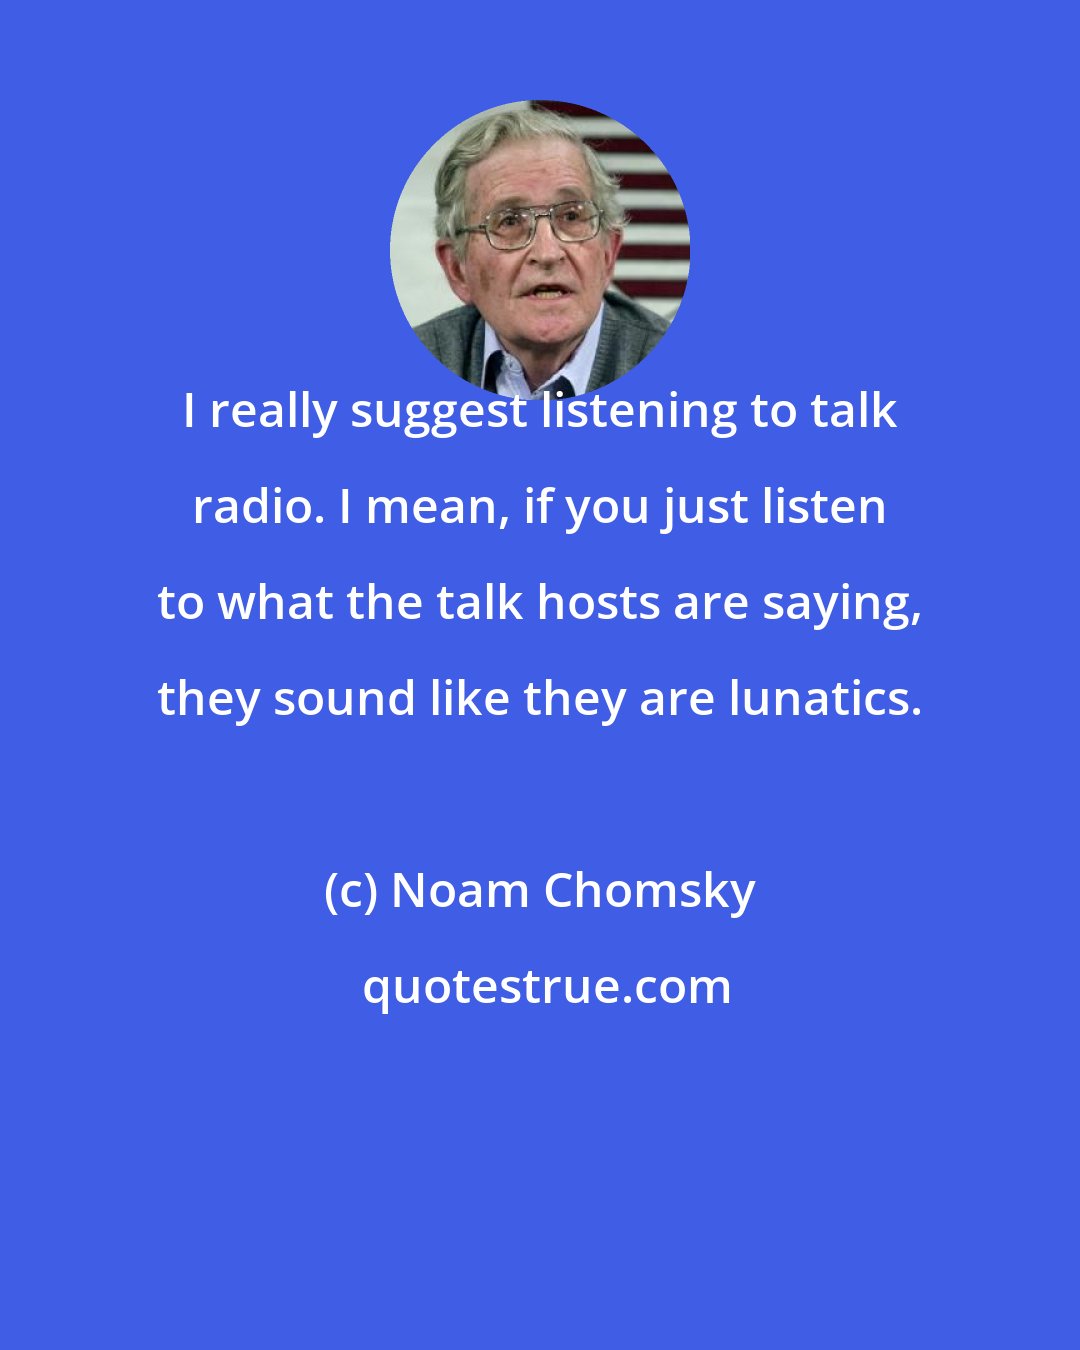 Noam Chomsky: I really suggest listening to talk radio. I mean, if you just listen to what the talk hosts are saying, they sound like they are lunatics.